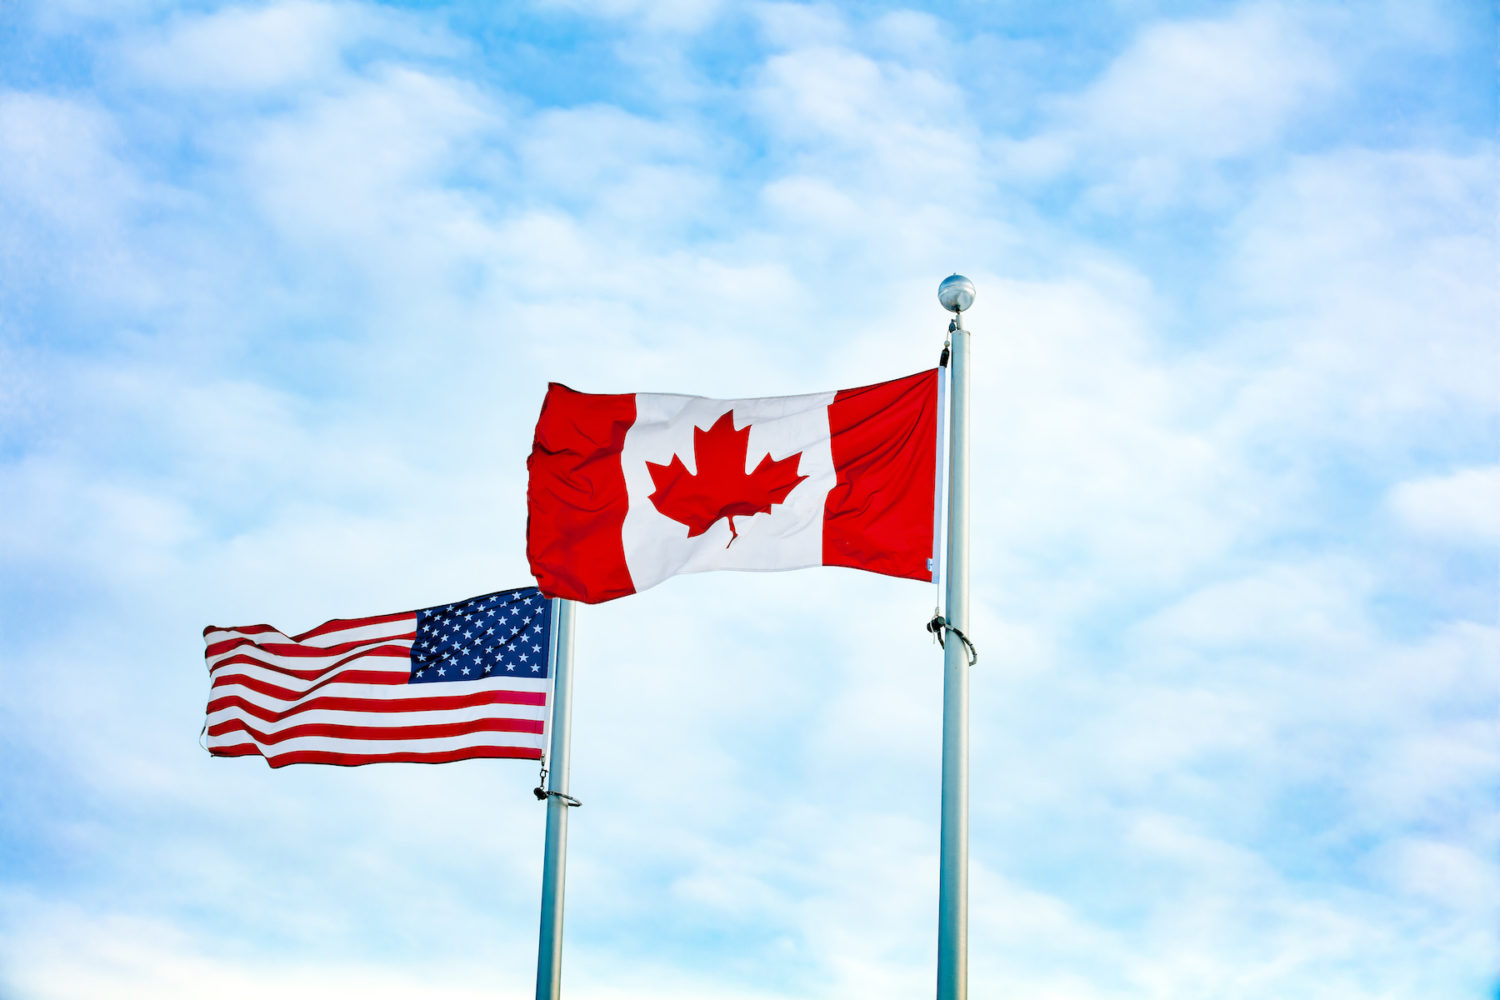 Liberty Cross Border Solutions | Insurance Companies In Canada - ALIGNED Insurance brokers